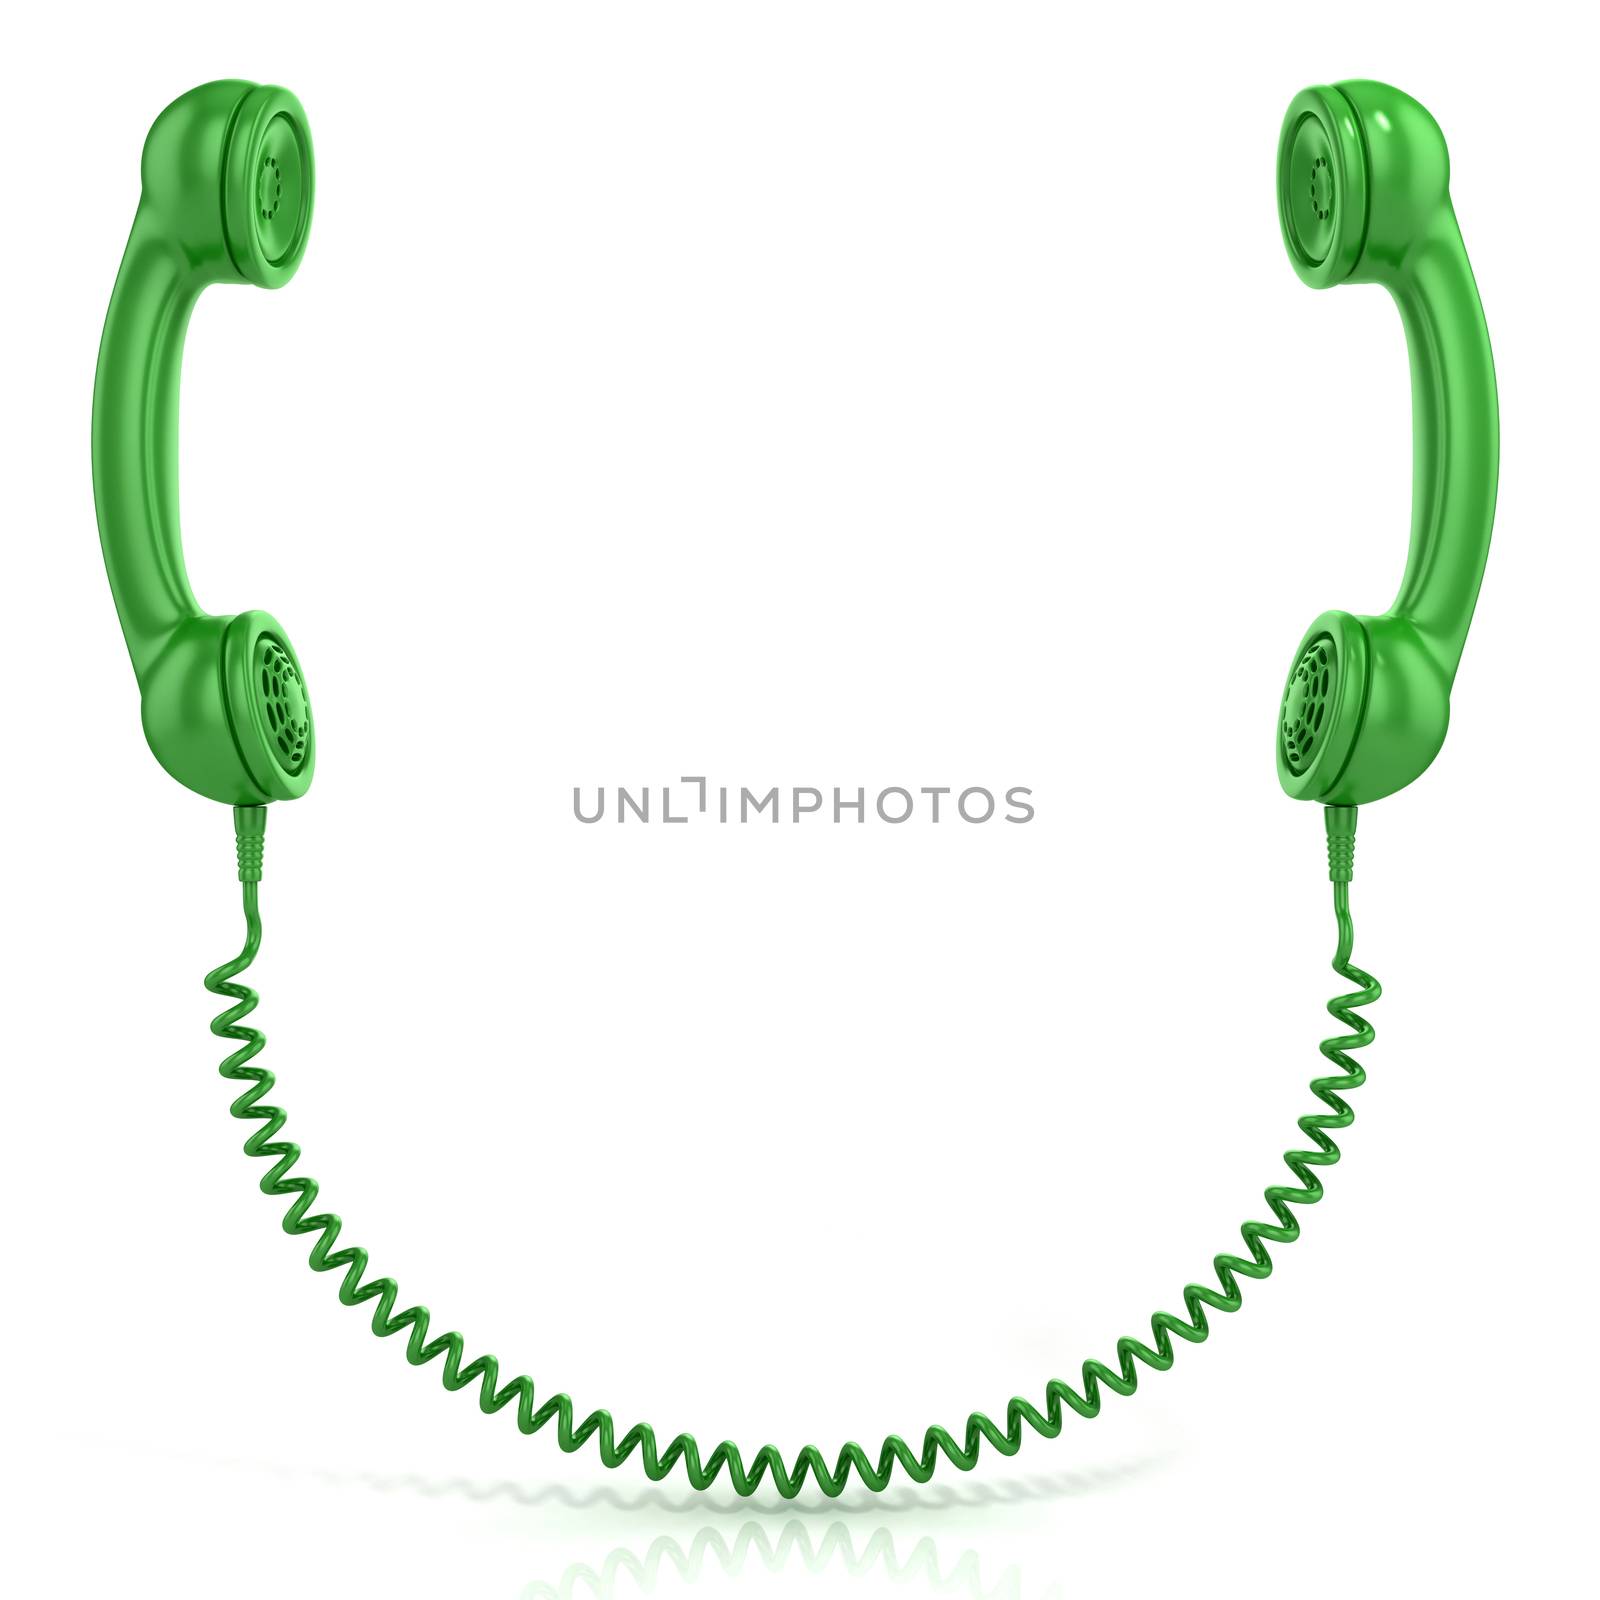 Green old fashion phone handsets connected by djmilic